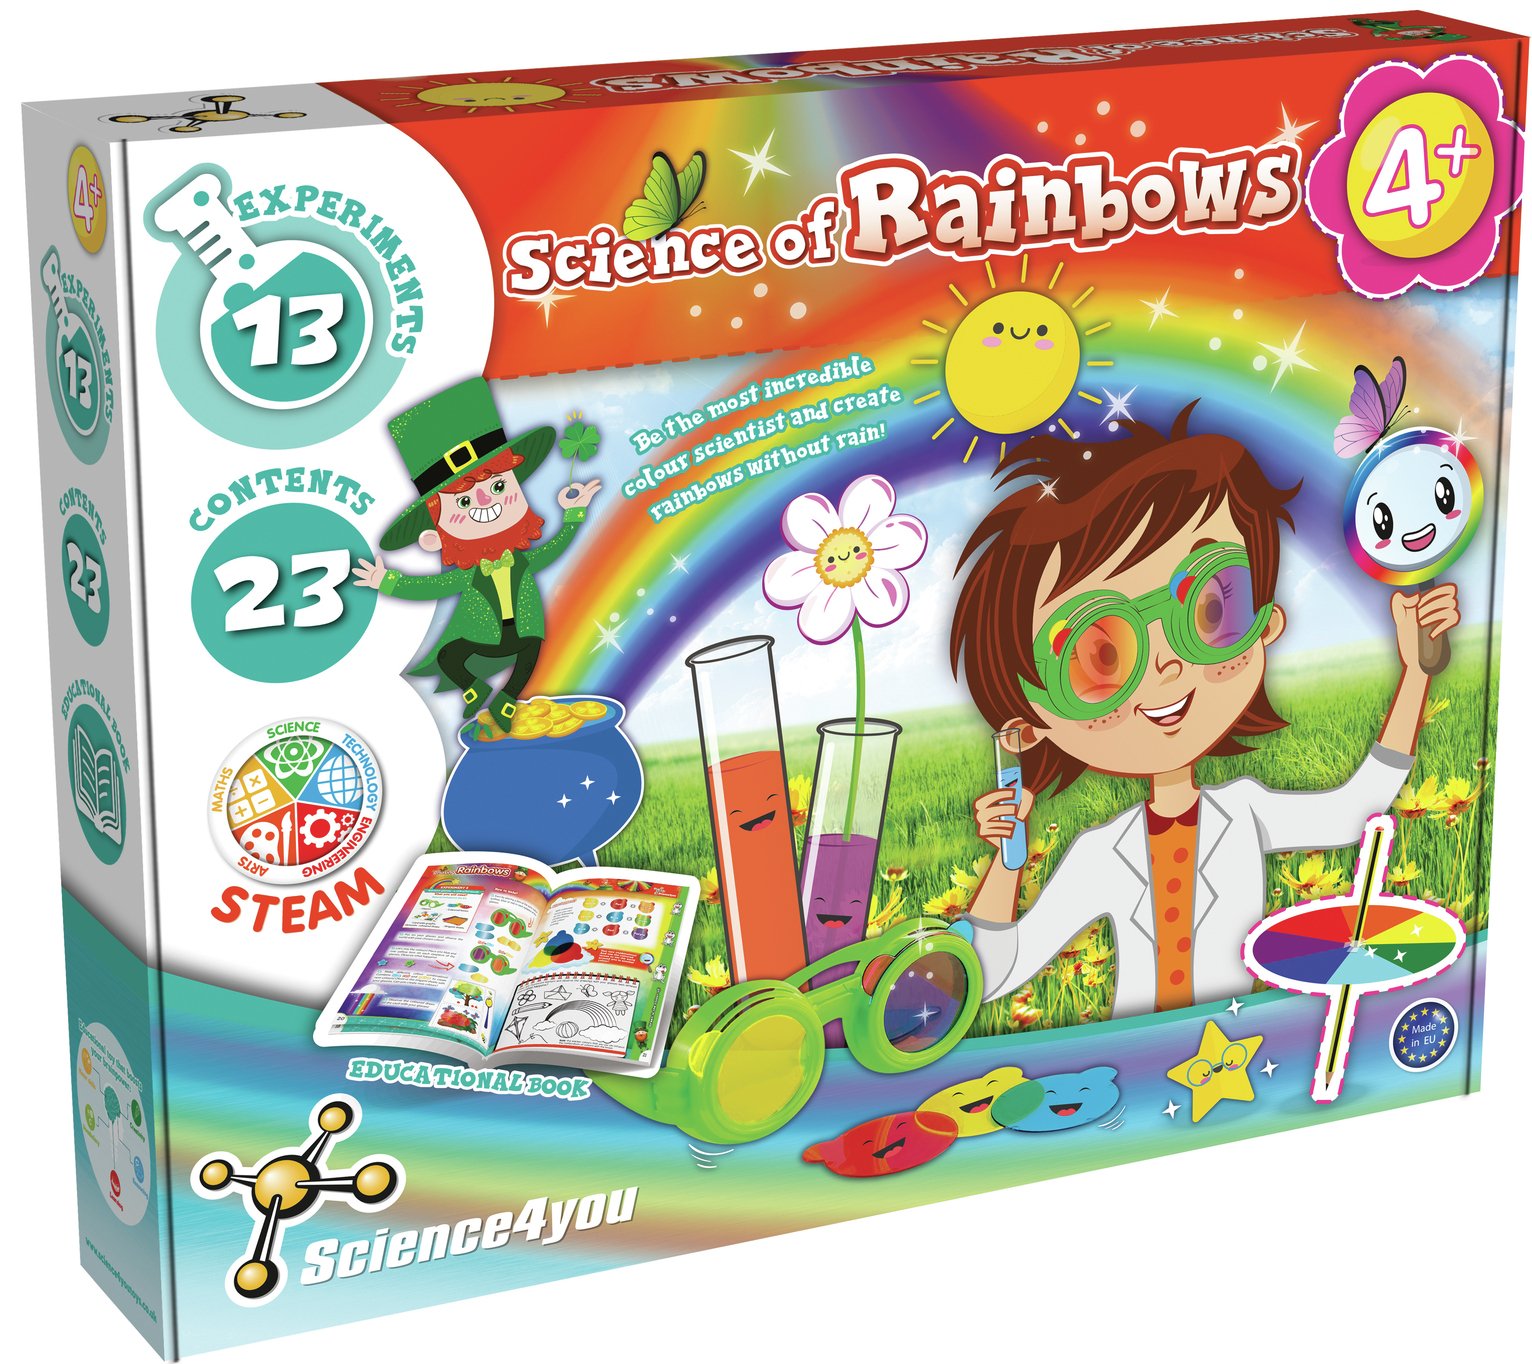 Science4you Science of Rainbows Review